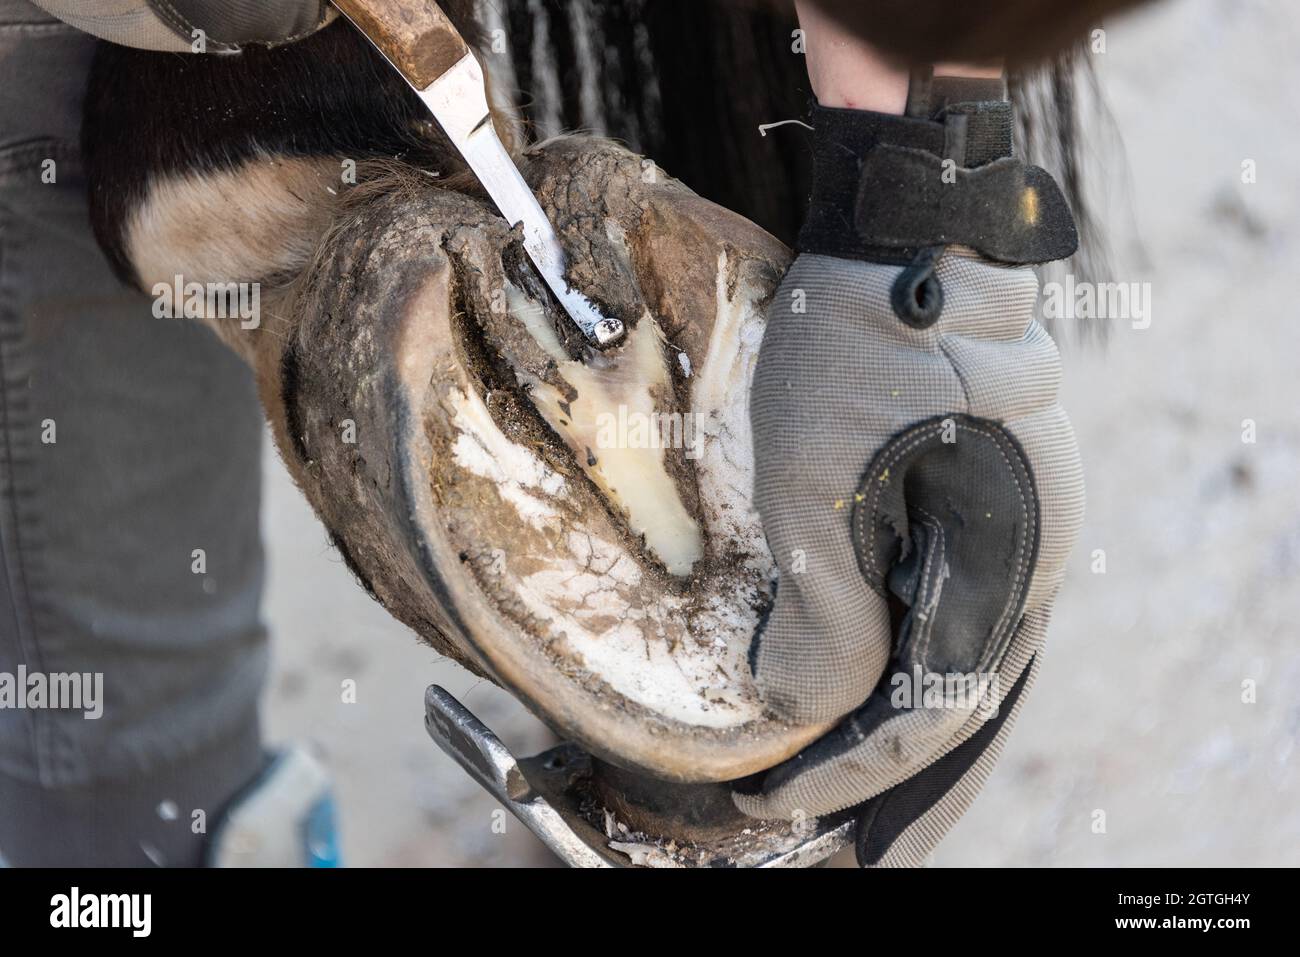 Natural Hoof Trimming The Farrier Trims And Shapes A Horse's Hooves Using  The Knife, Hoof Nippers Stock Photo - Alamy